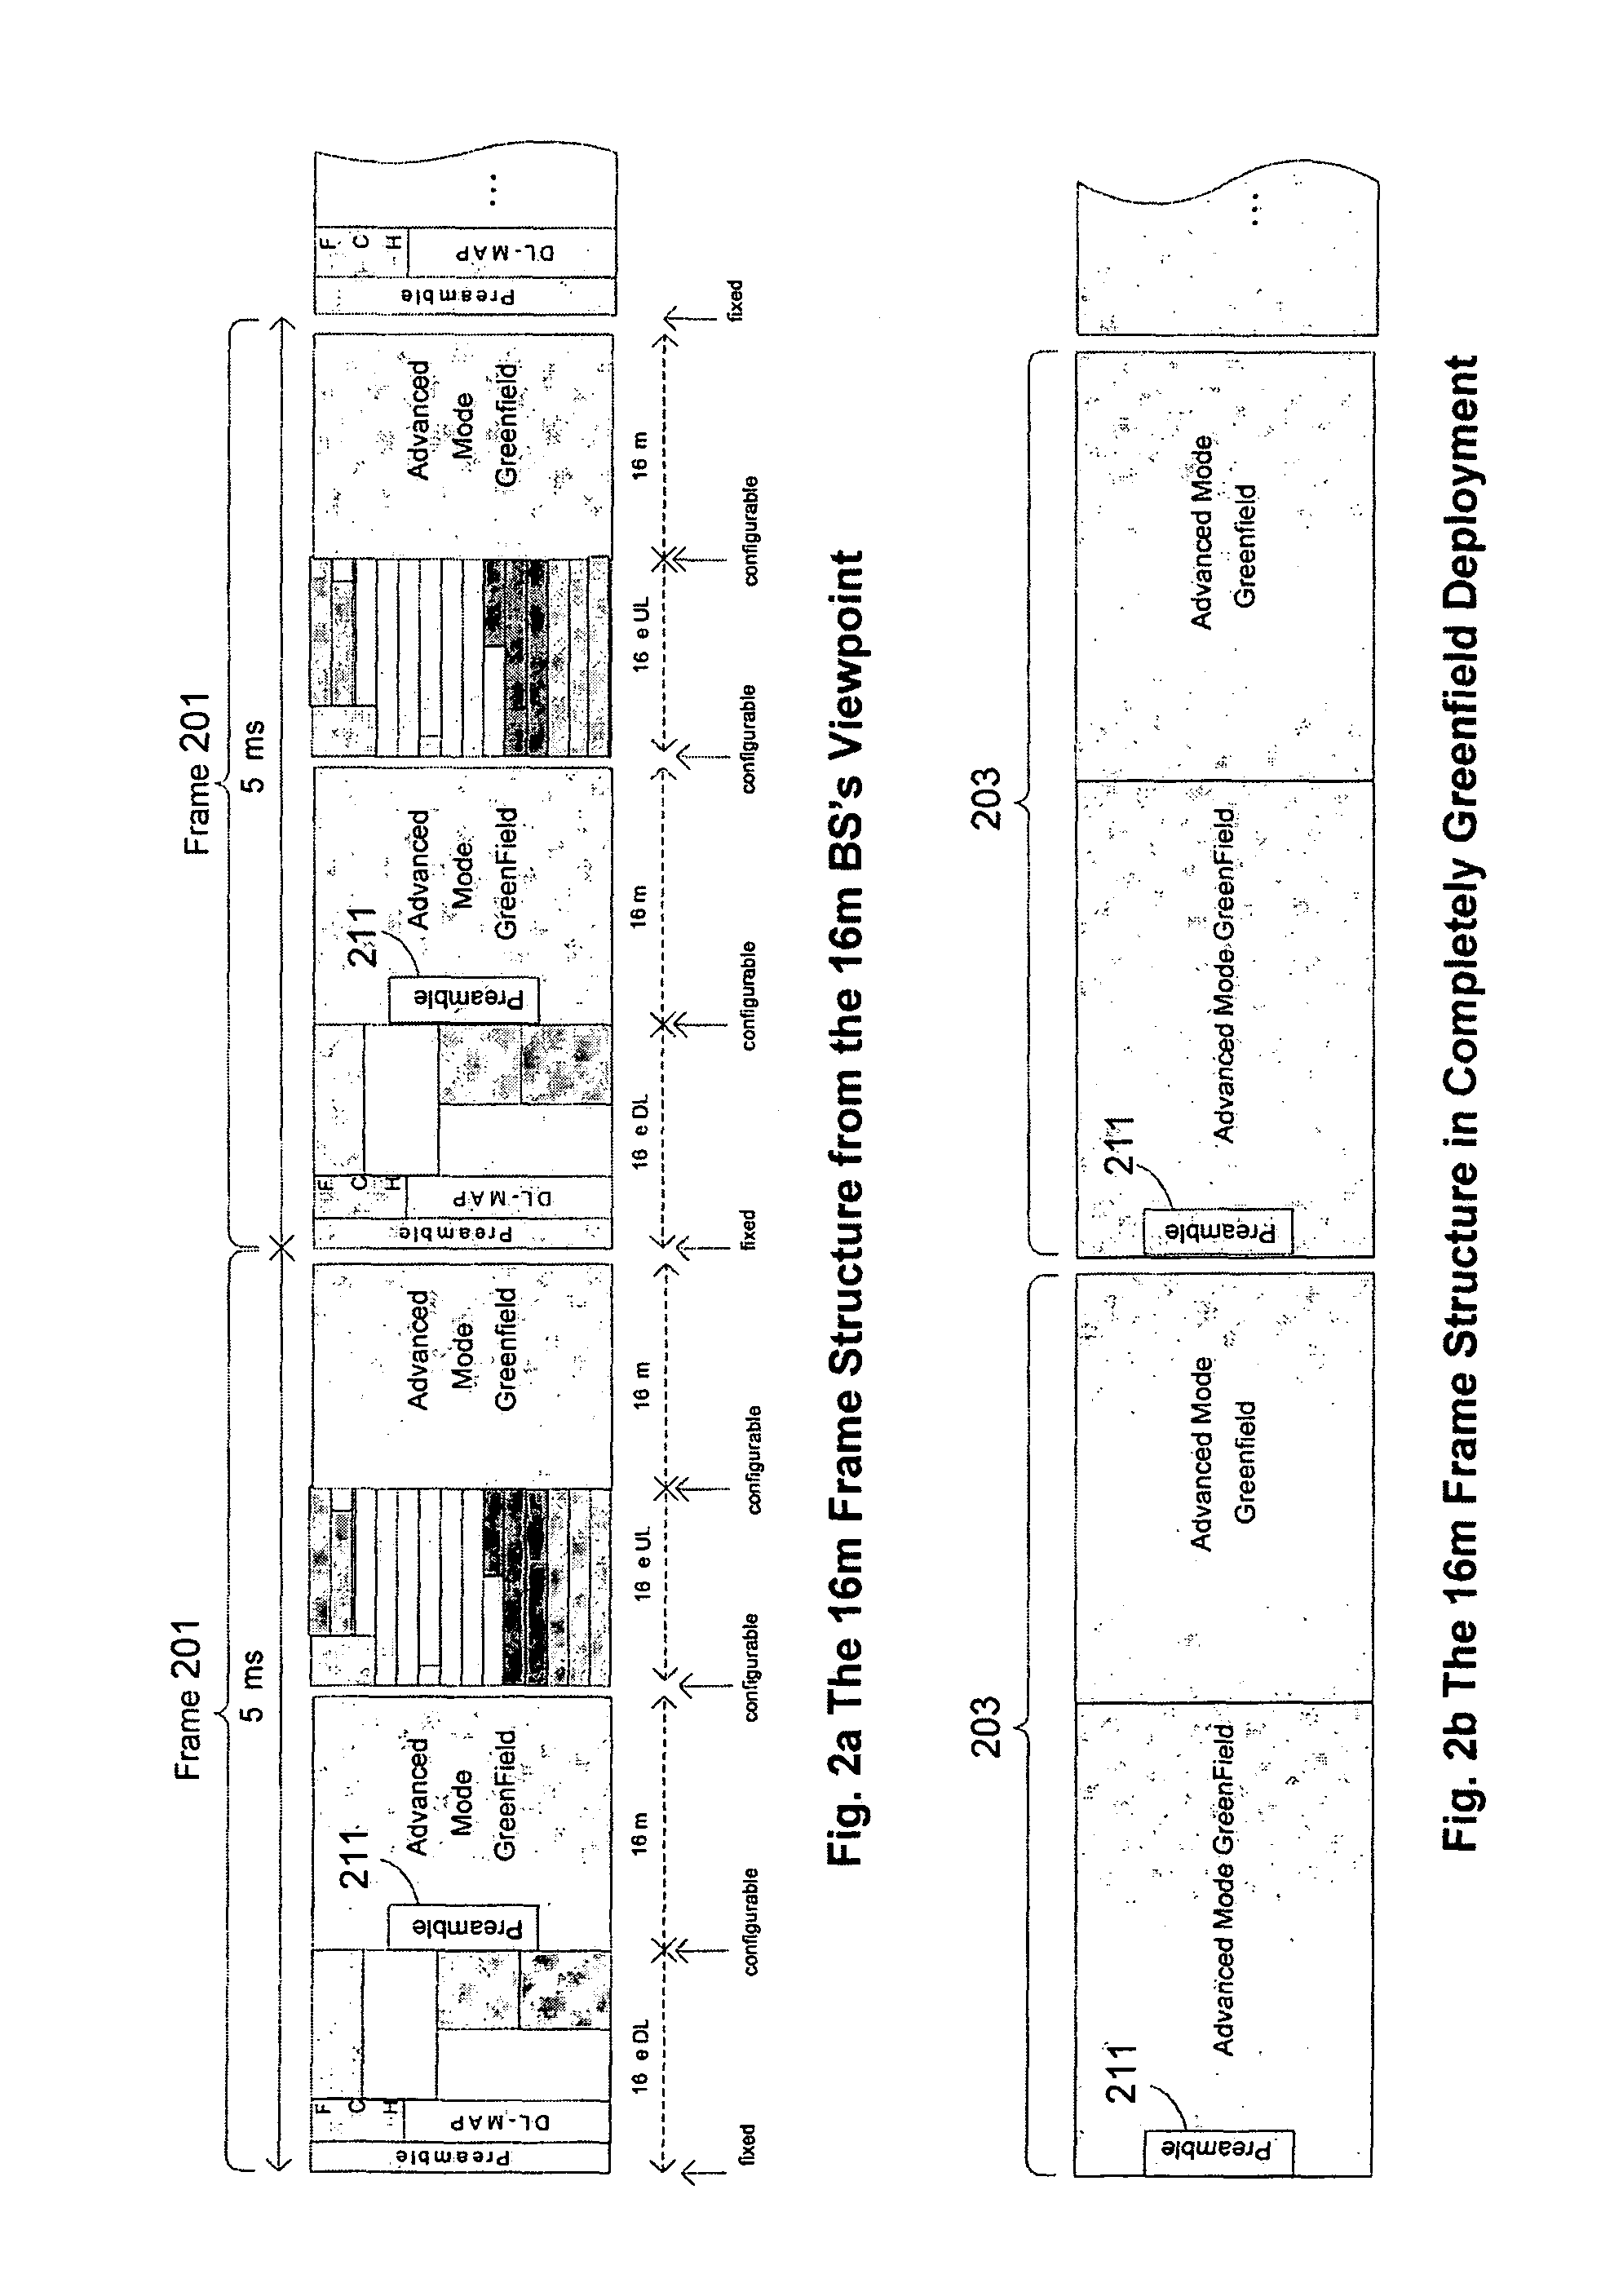 Efficient and consistent wireless downlink channel configuration